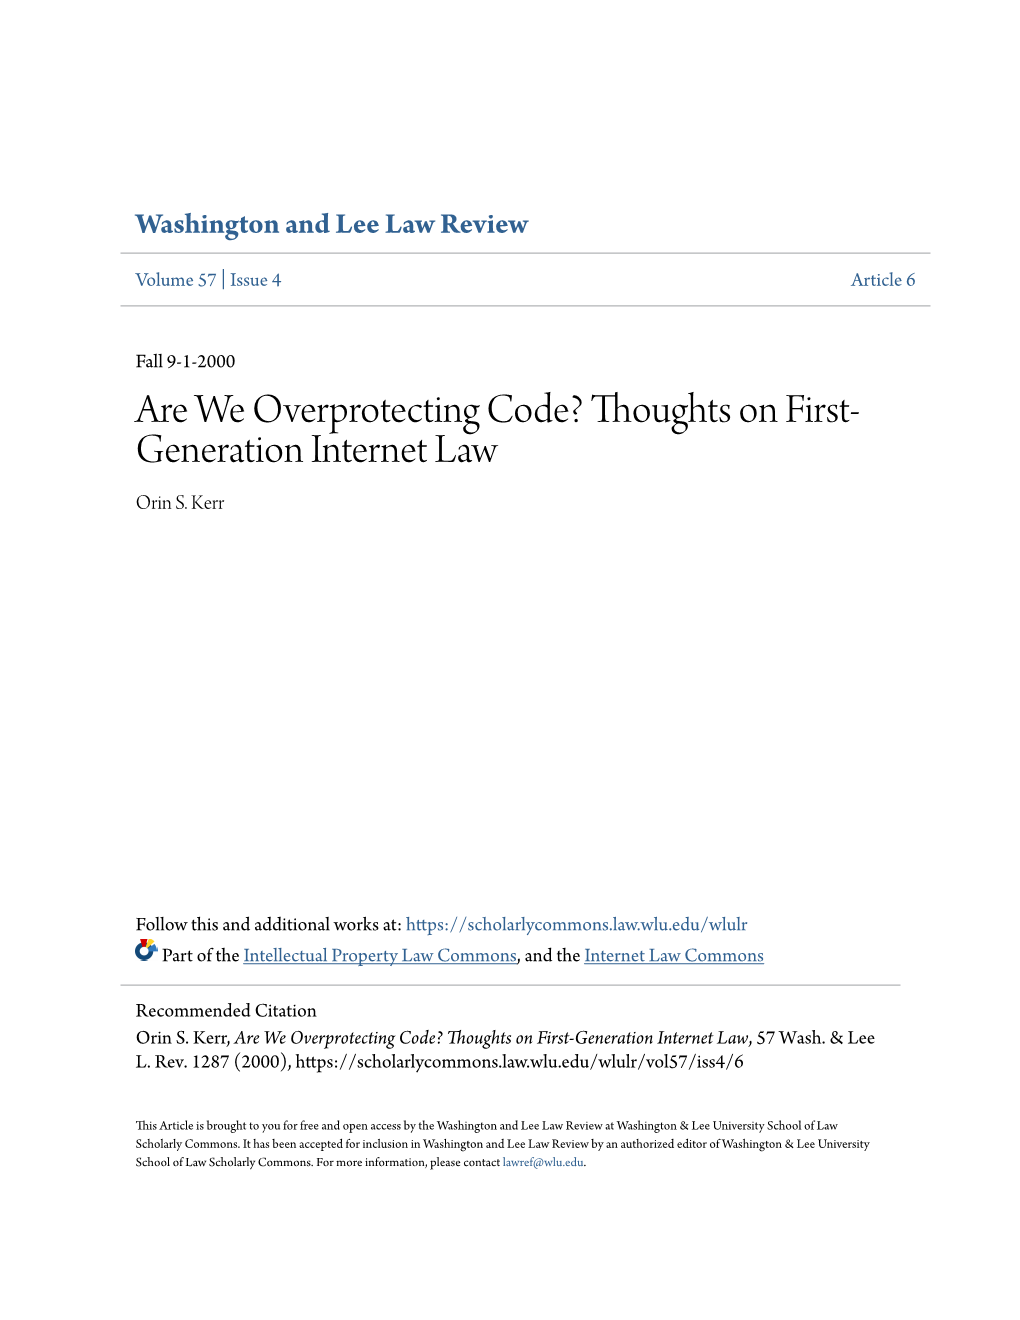 Thoughts on First-Generation Internet Law, 57 Wash